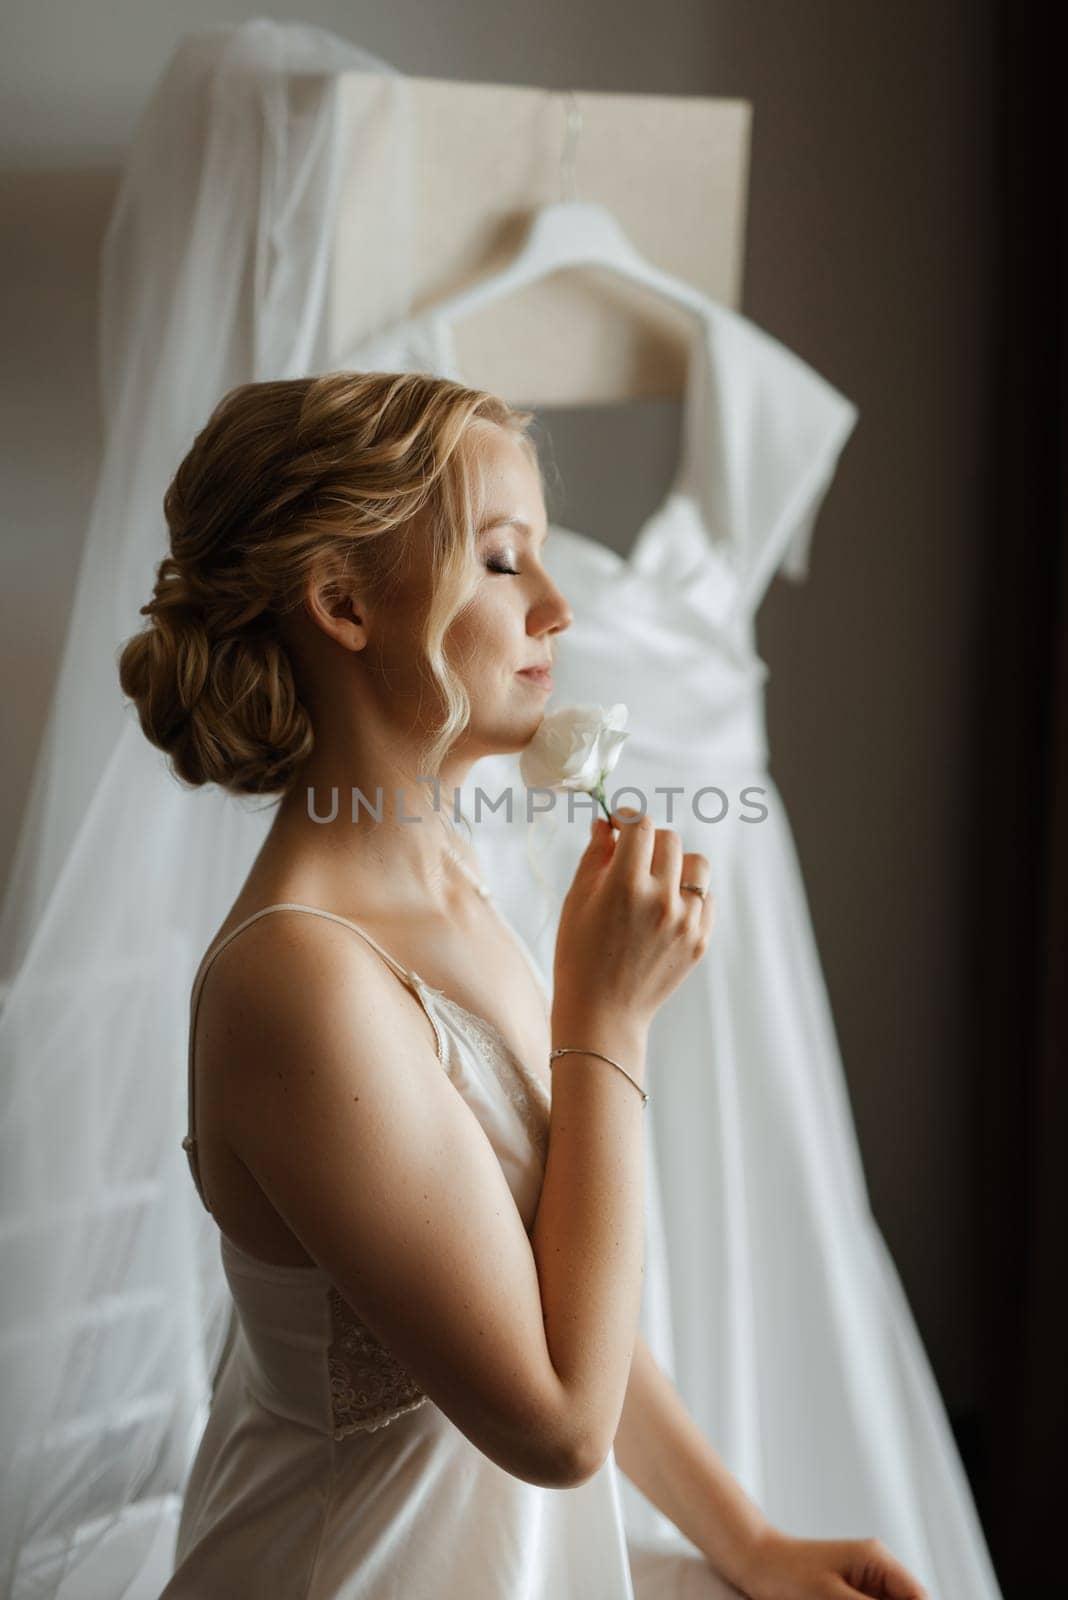 morning of the bride with the creation of the image by Andreua